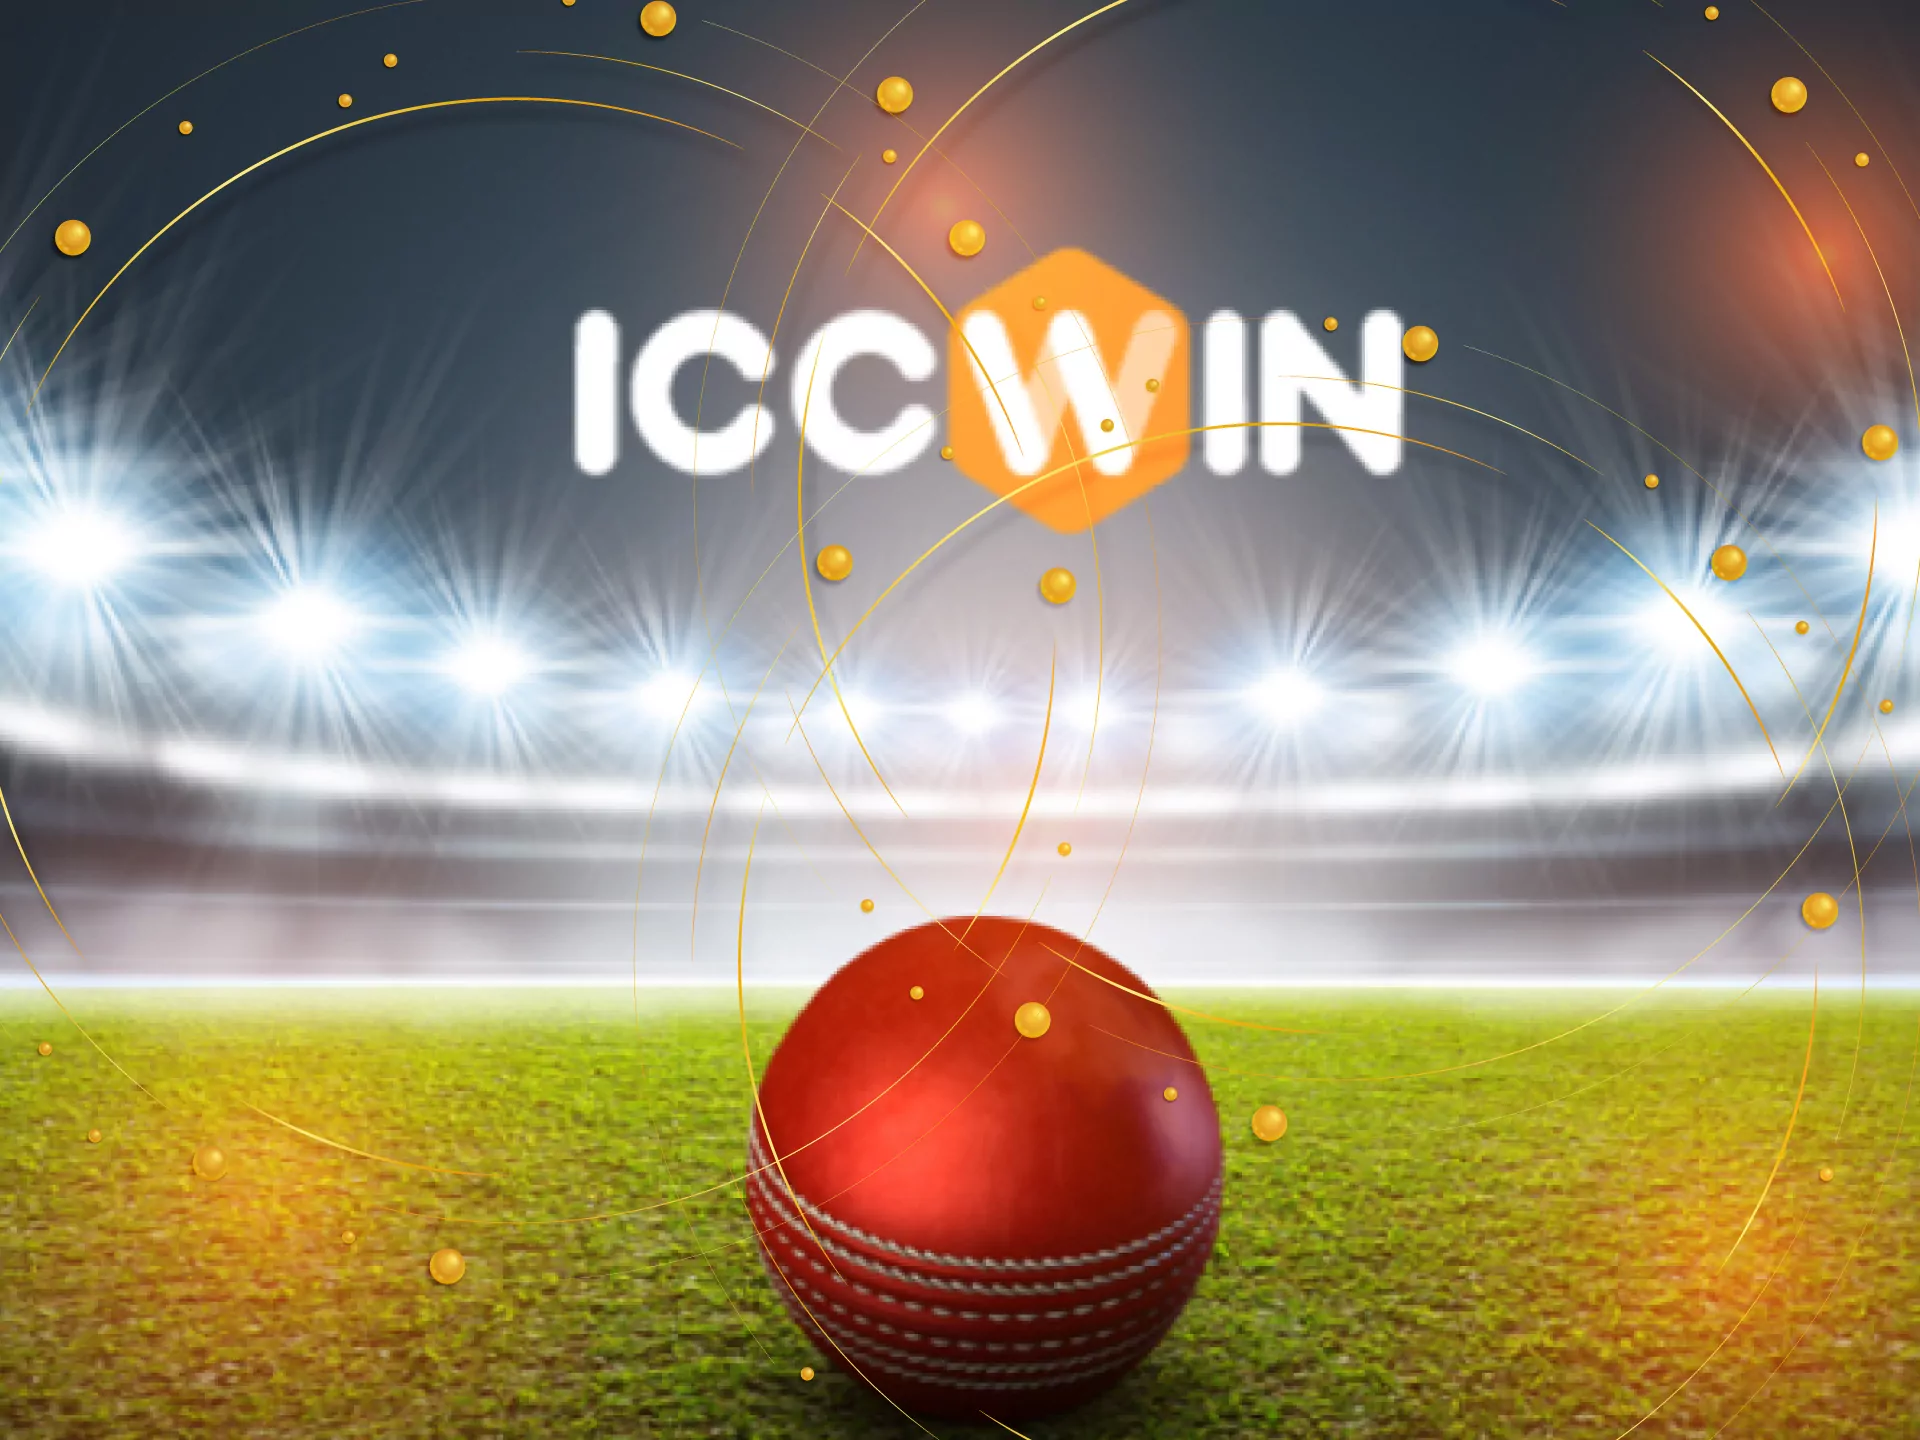 You can also place accumulator bets at ICCWIN.